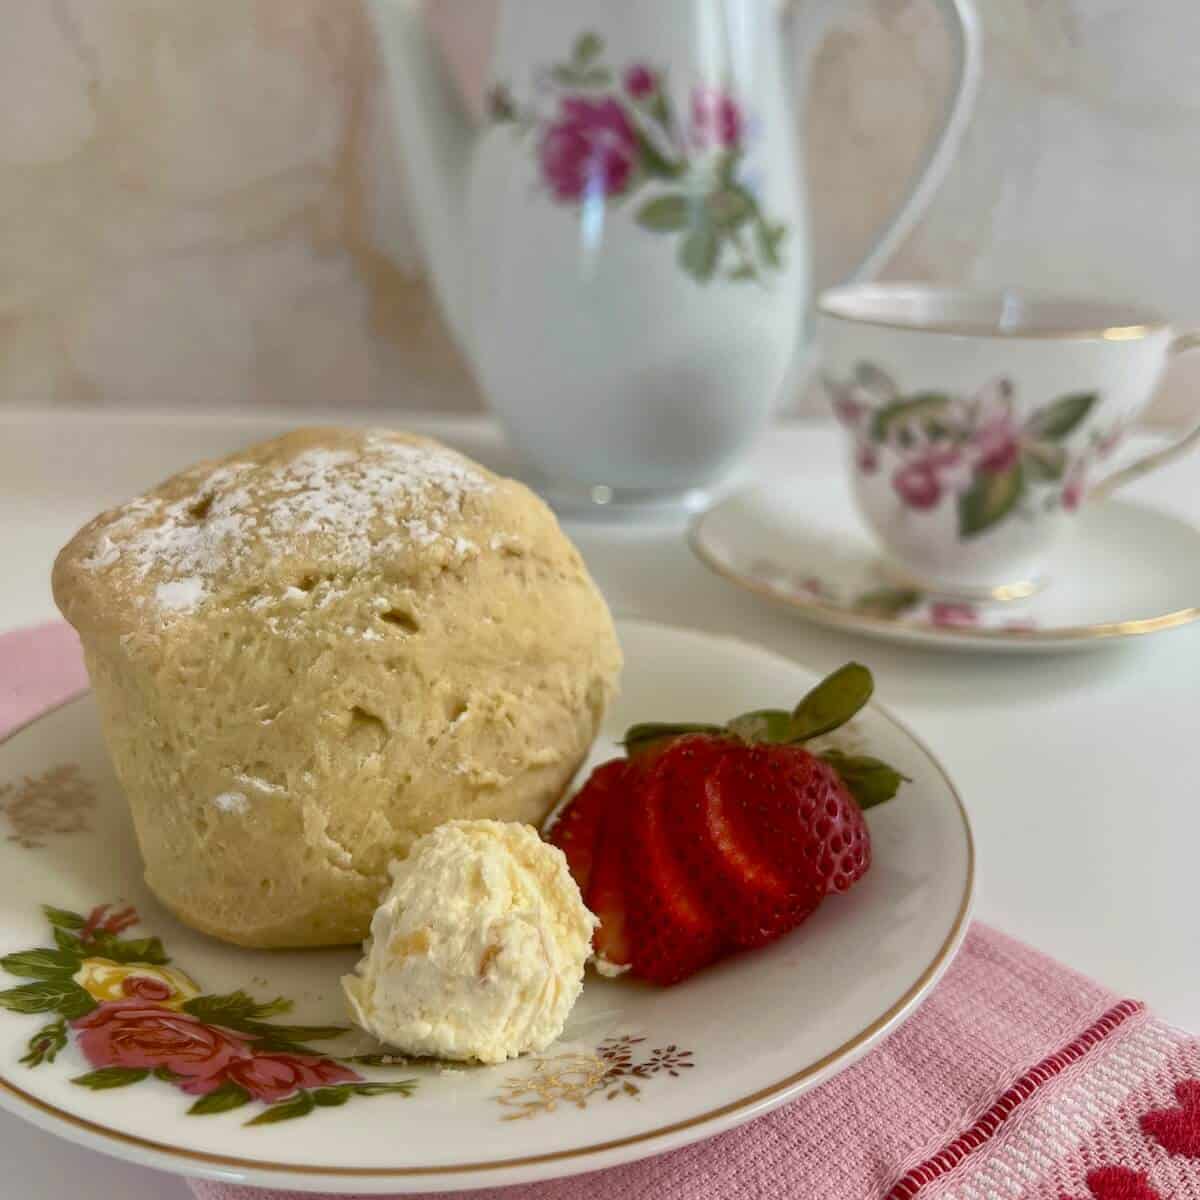 Clotted cream alongside a scone & cut strawberry on a flowered plate with teapot & teacup behind.